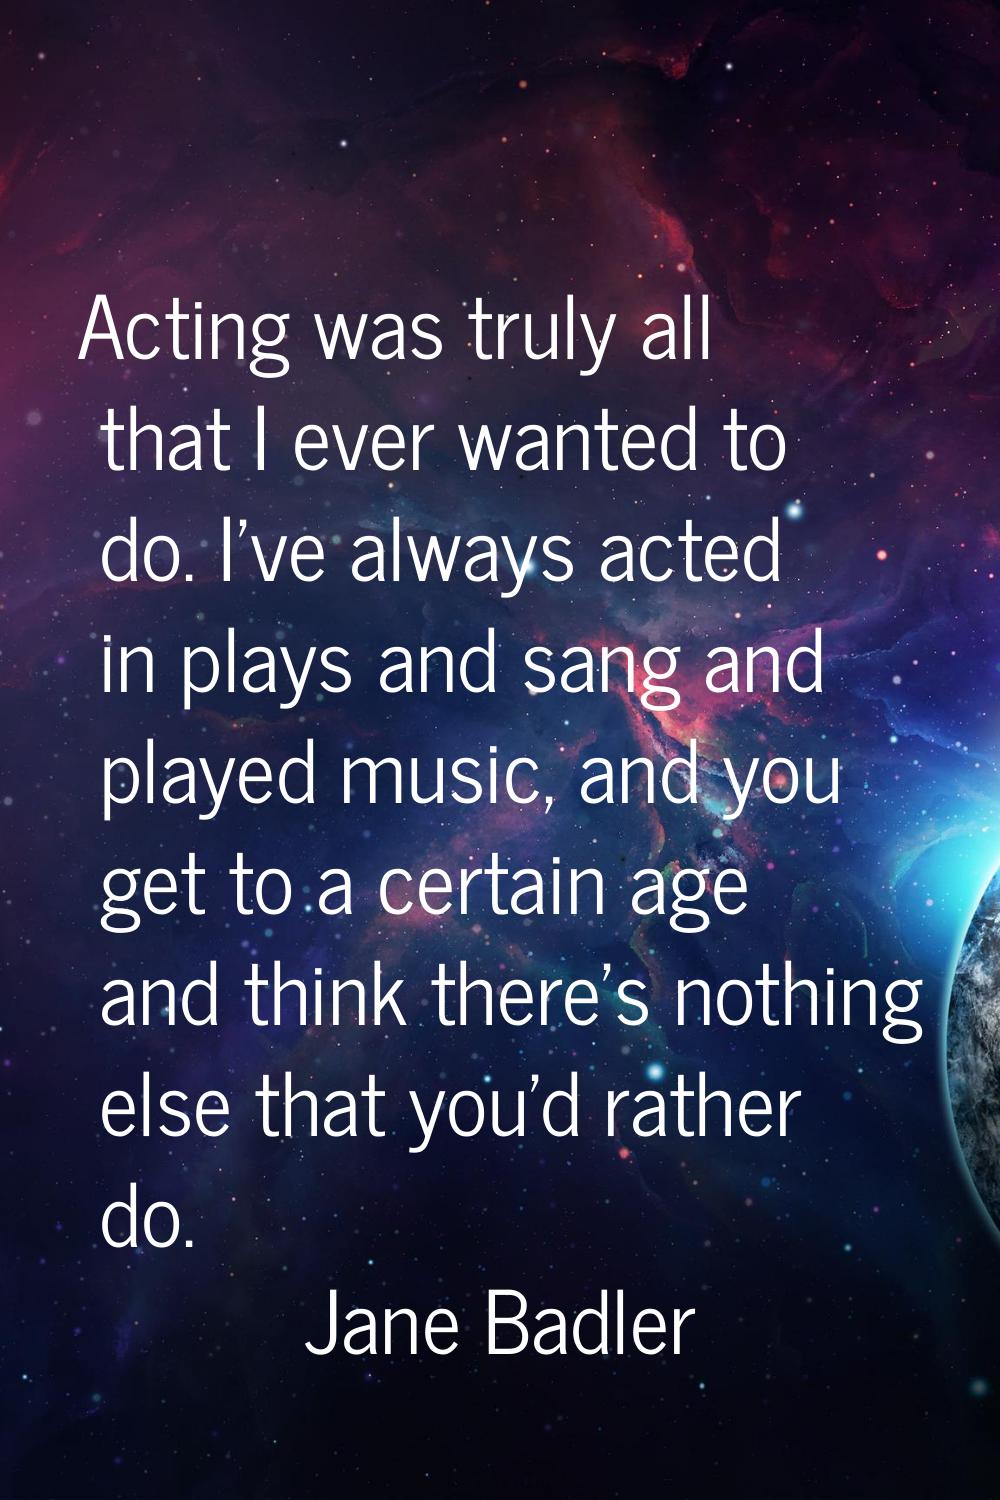 Acting was truly all that I ever wanted to do. I've always acted in plays and sang and played music